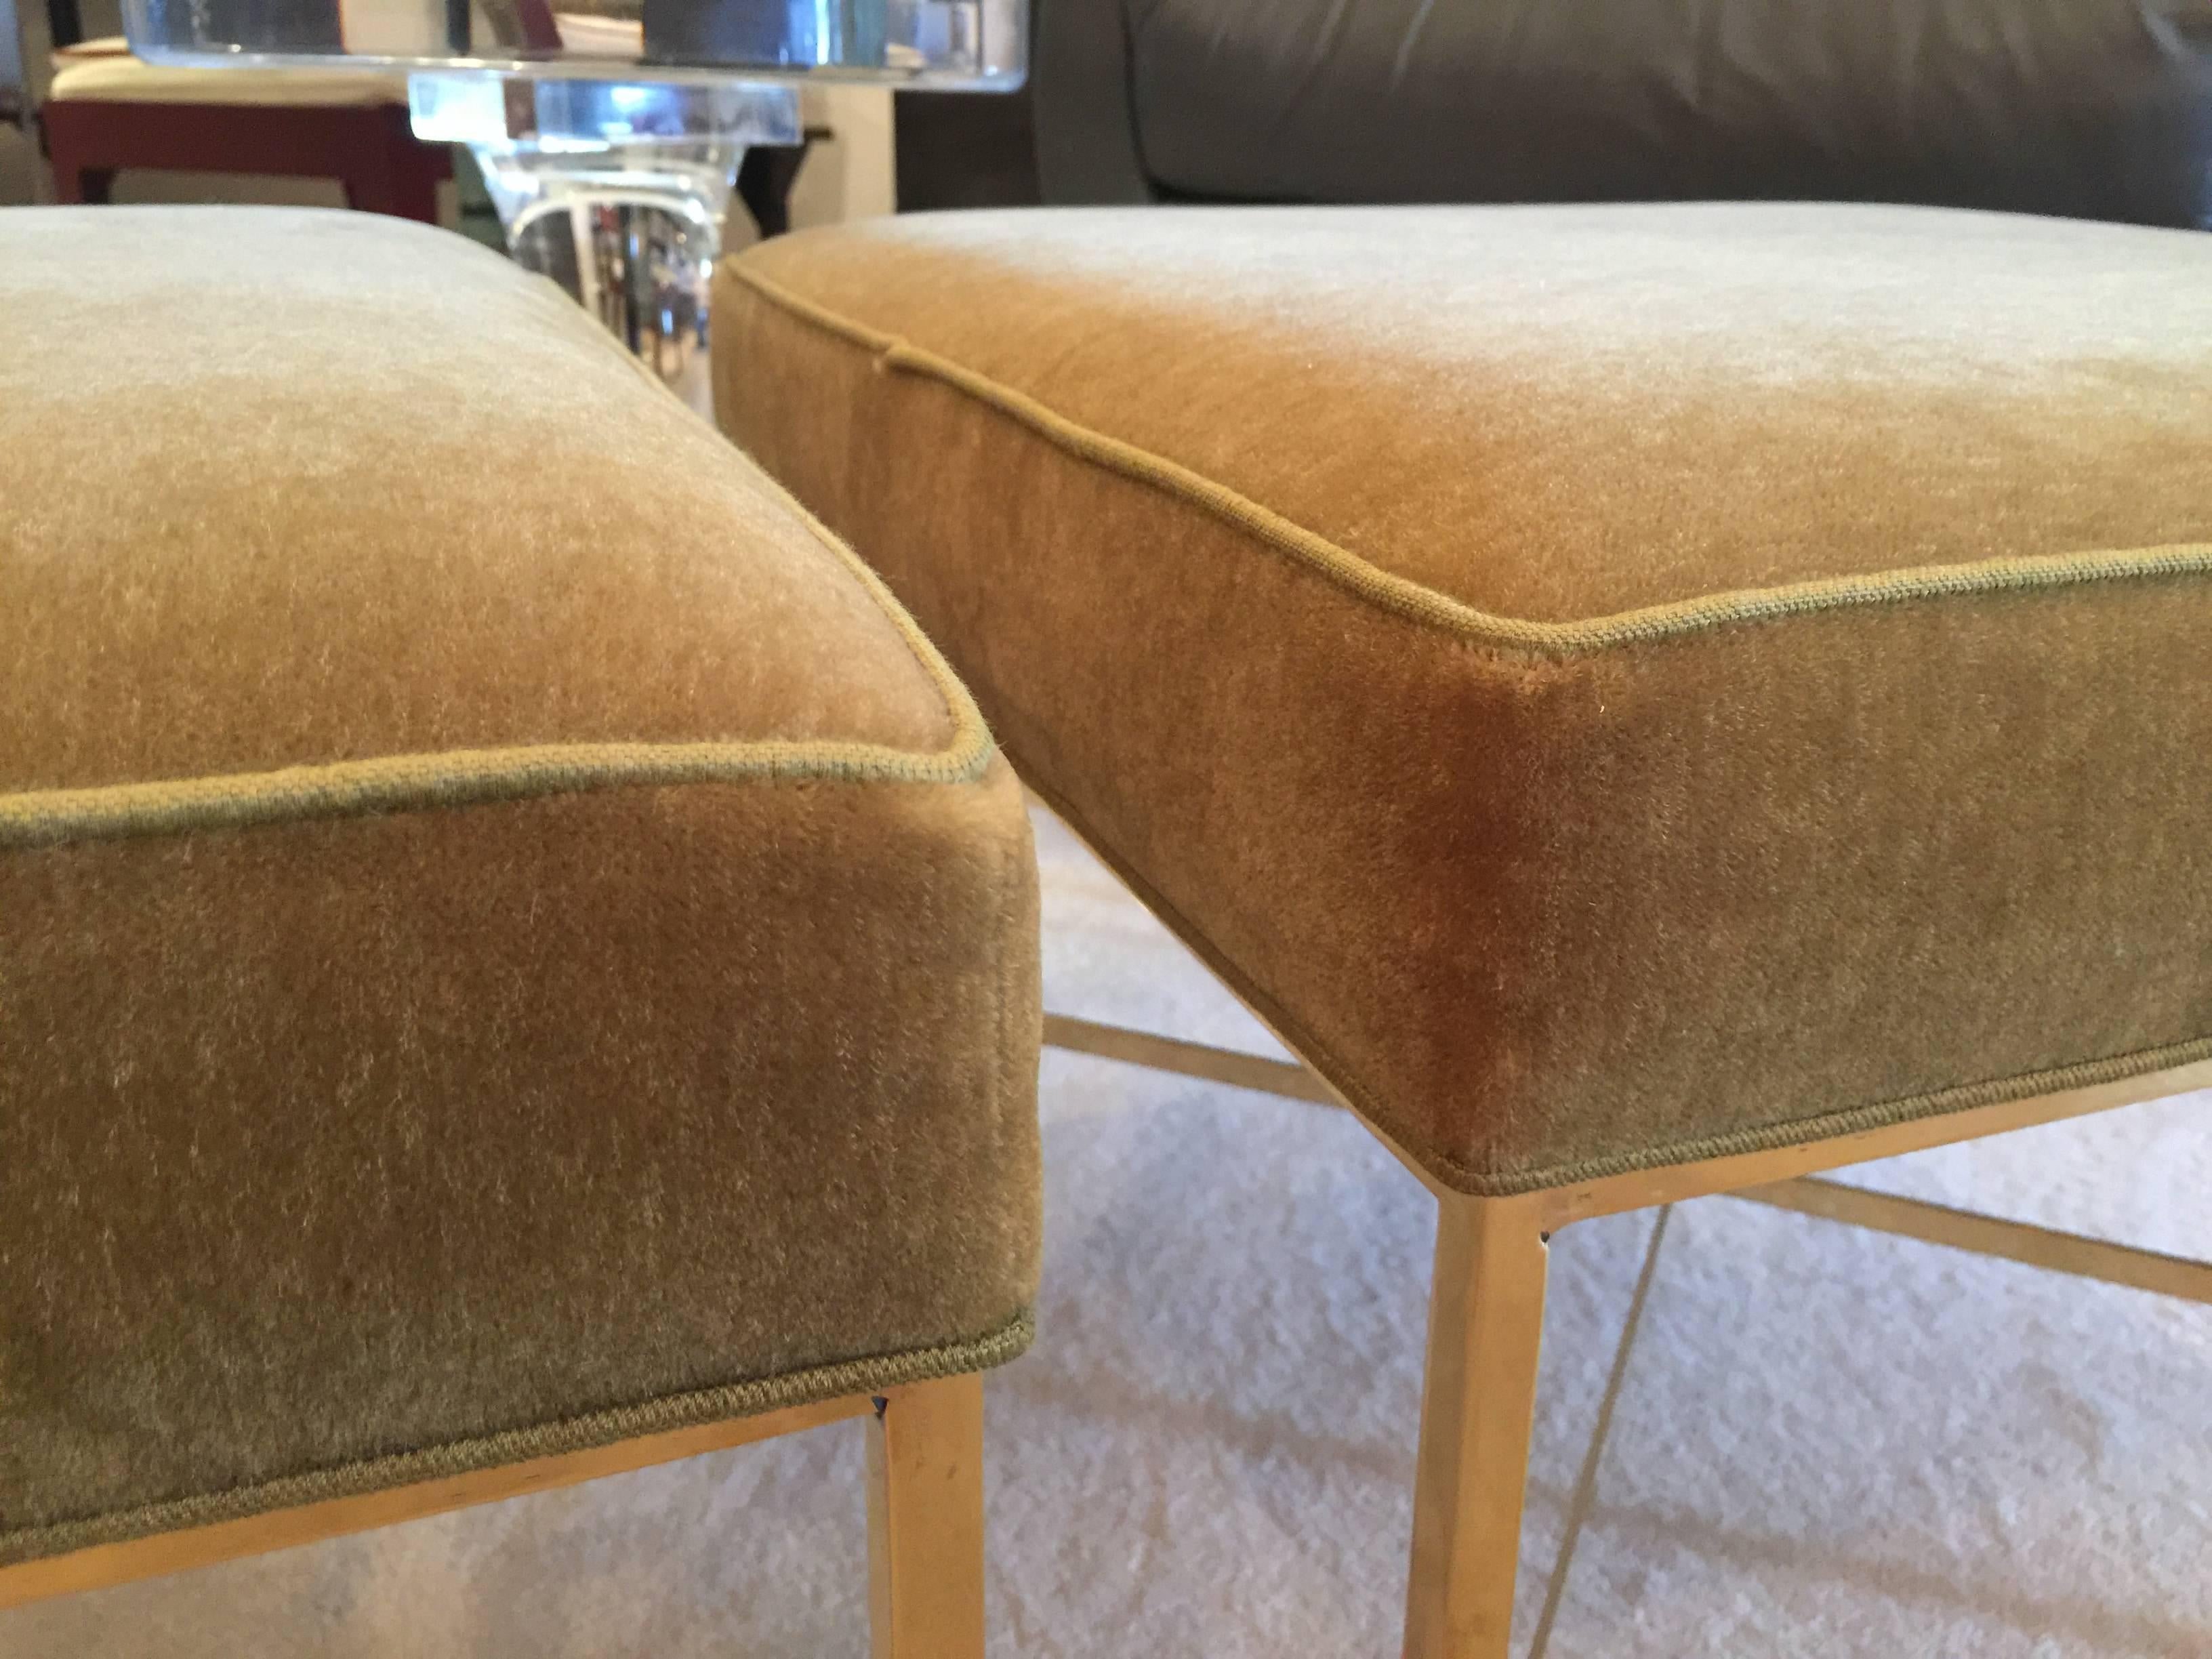 McCobb stools are perfect for additional seating. Restored with this rich and elegant Italian mohair fabric. Polished to perfection and ready to use!